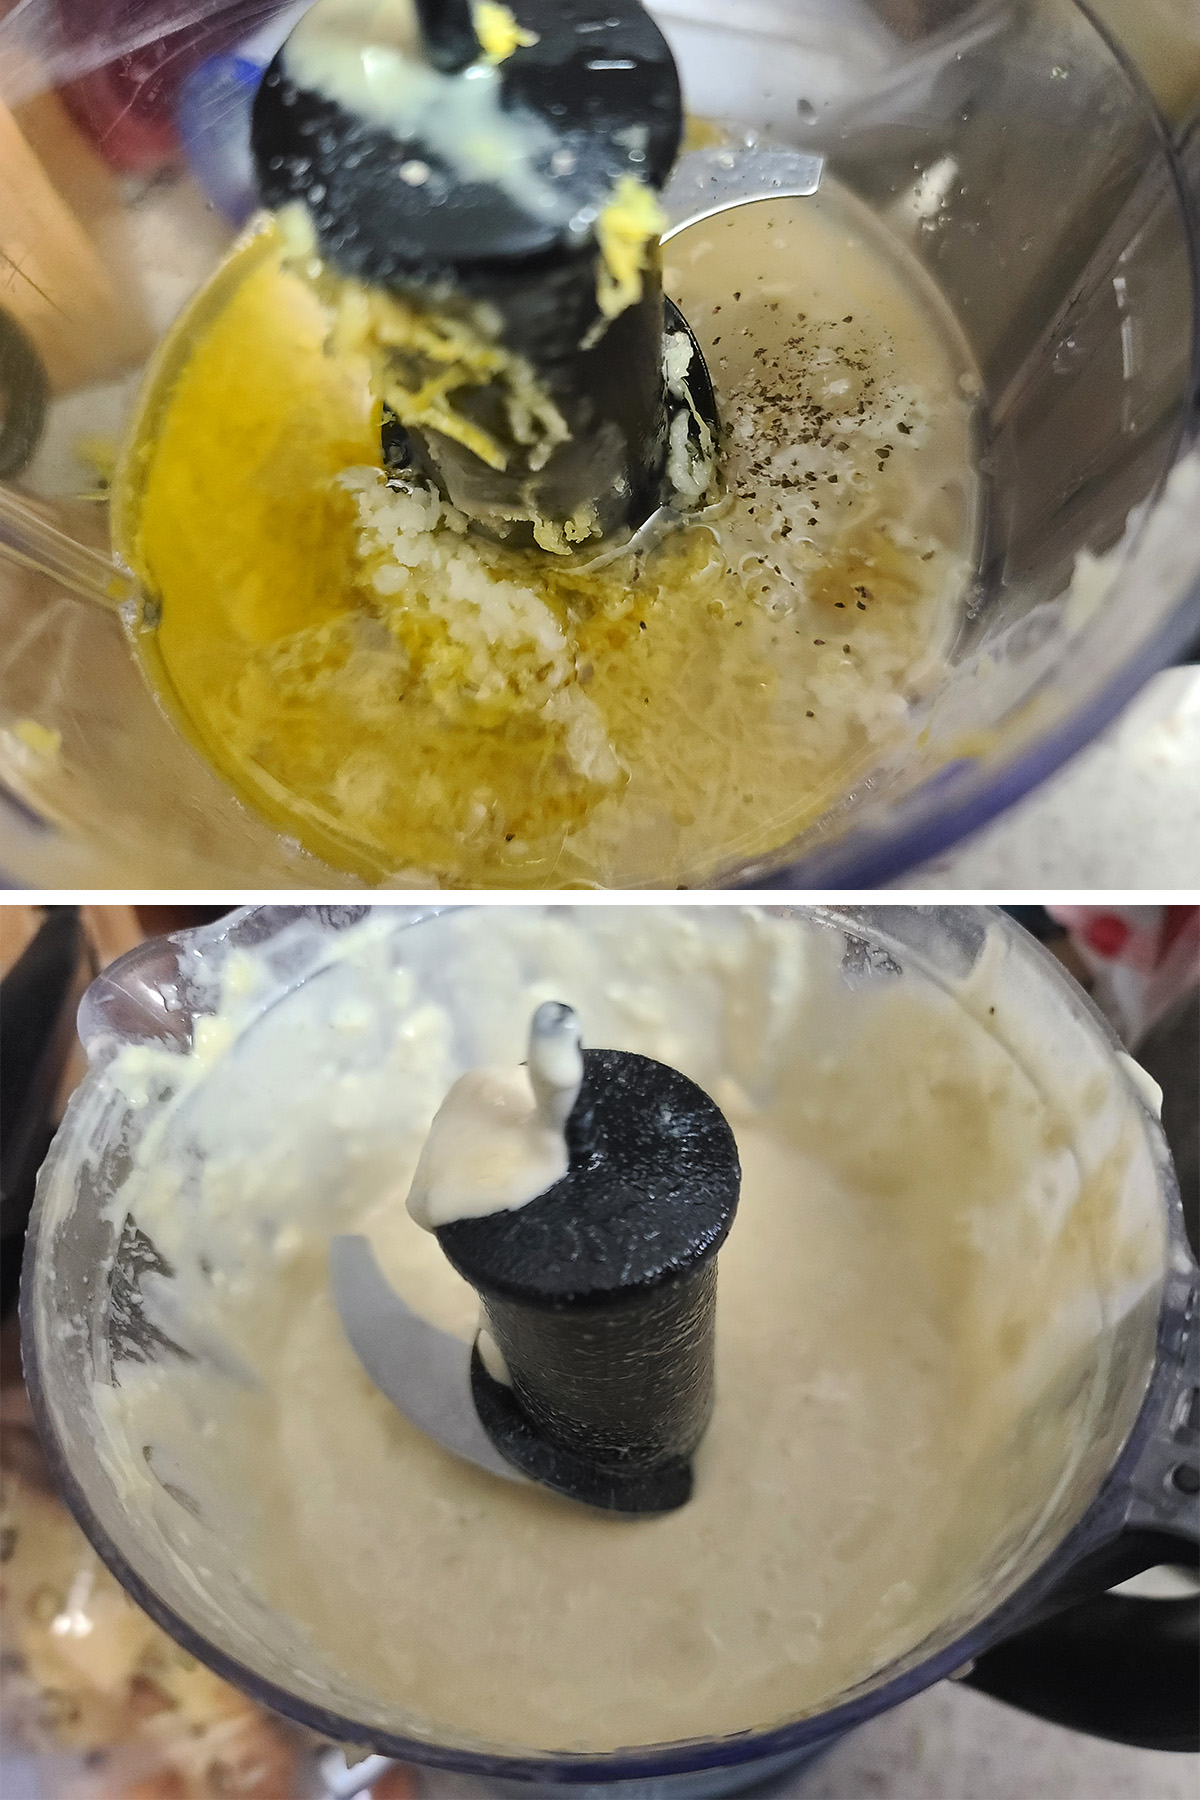 A 2 part image showing the lemon tahini sauce being made.